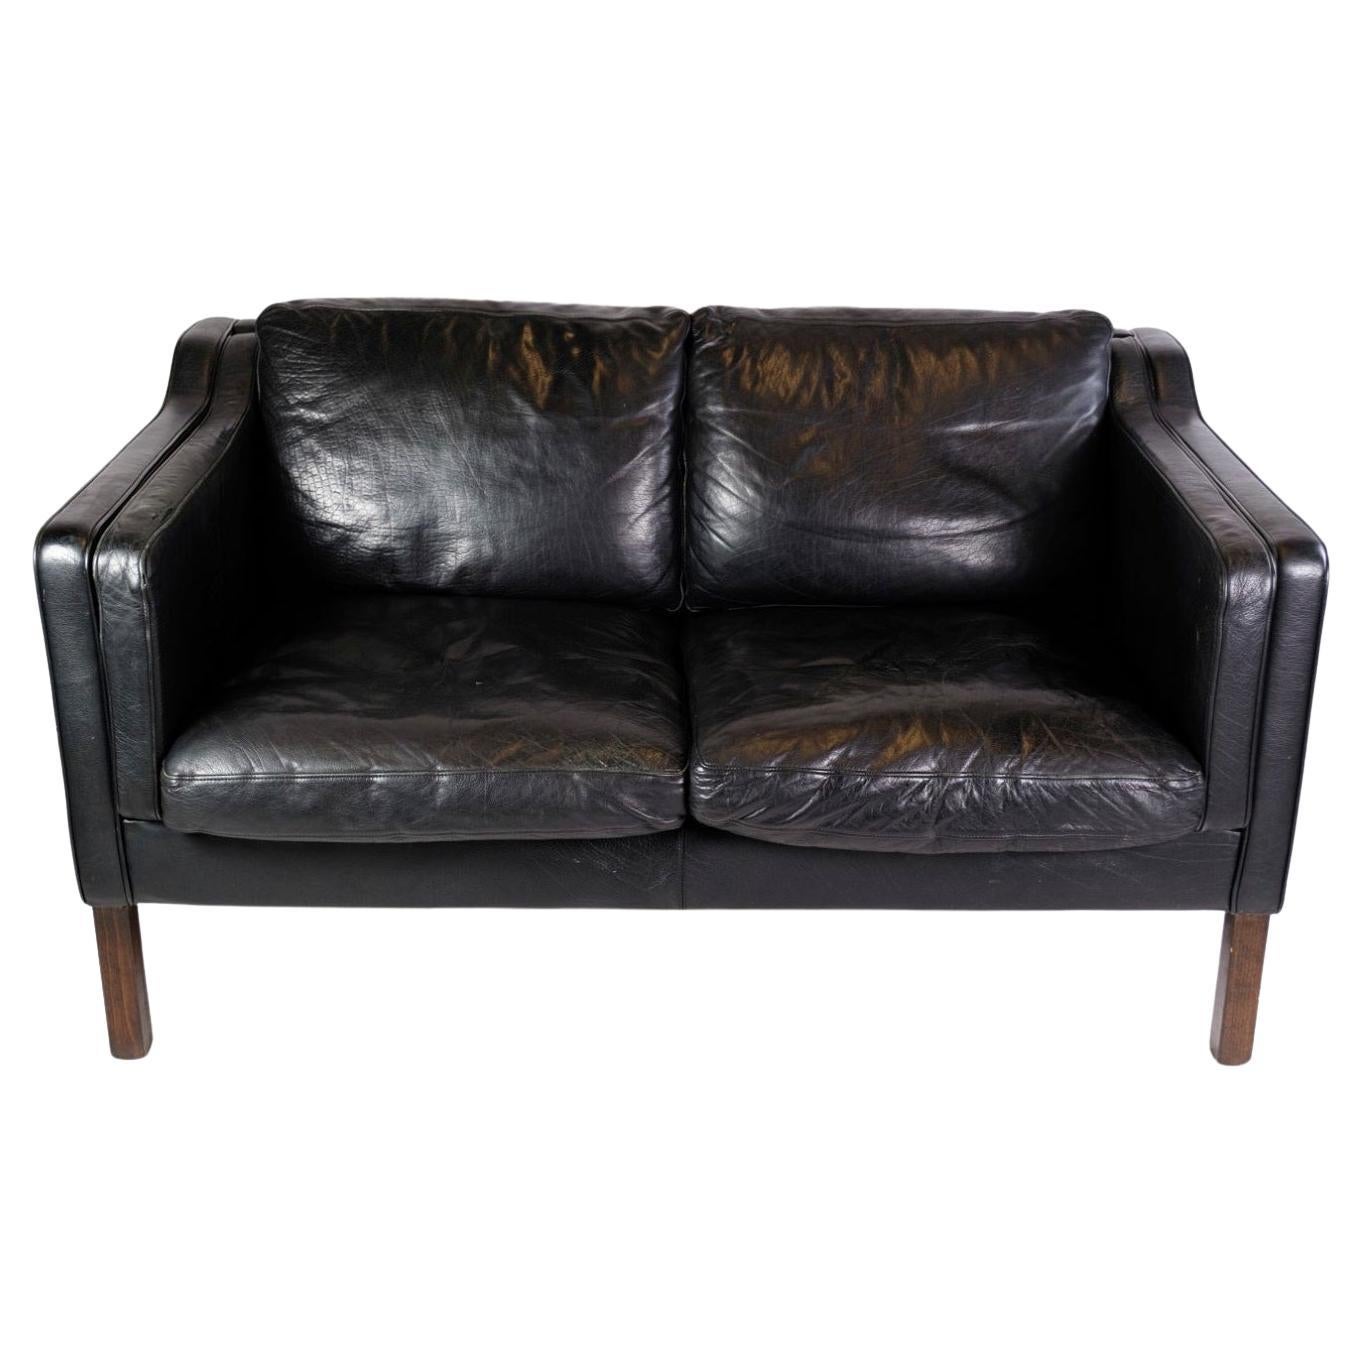 Two-Seater Sofa Upholstered in Black Leather Made by Stouby Møbelfabrik